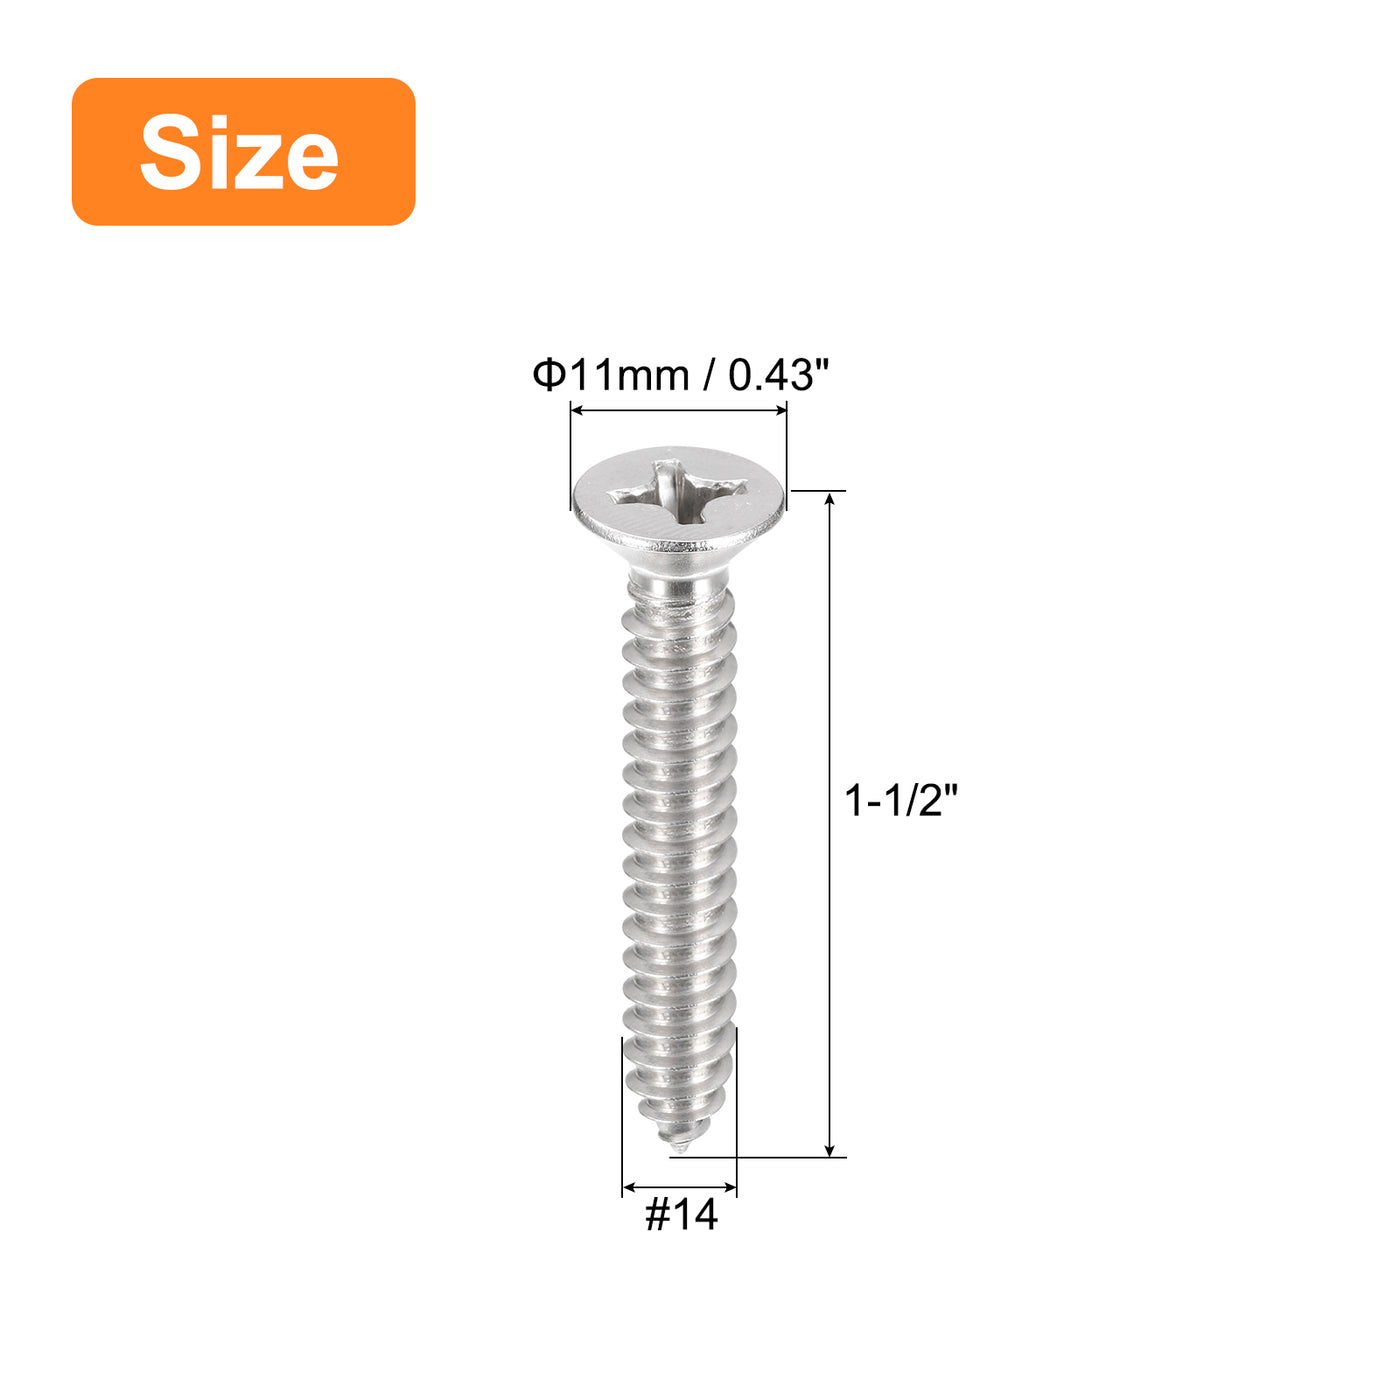 uxcell Uxcell #14x1-1/2" Wood Screws, 15pcs Phillips Self Tapping Screws 304 Stainless Steel